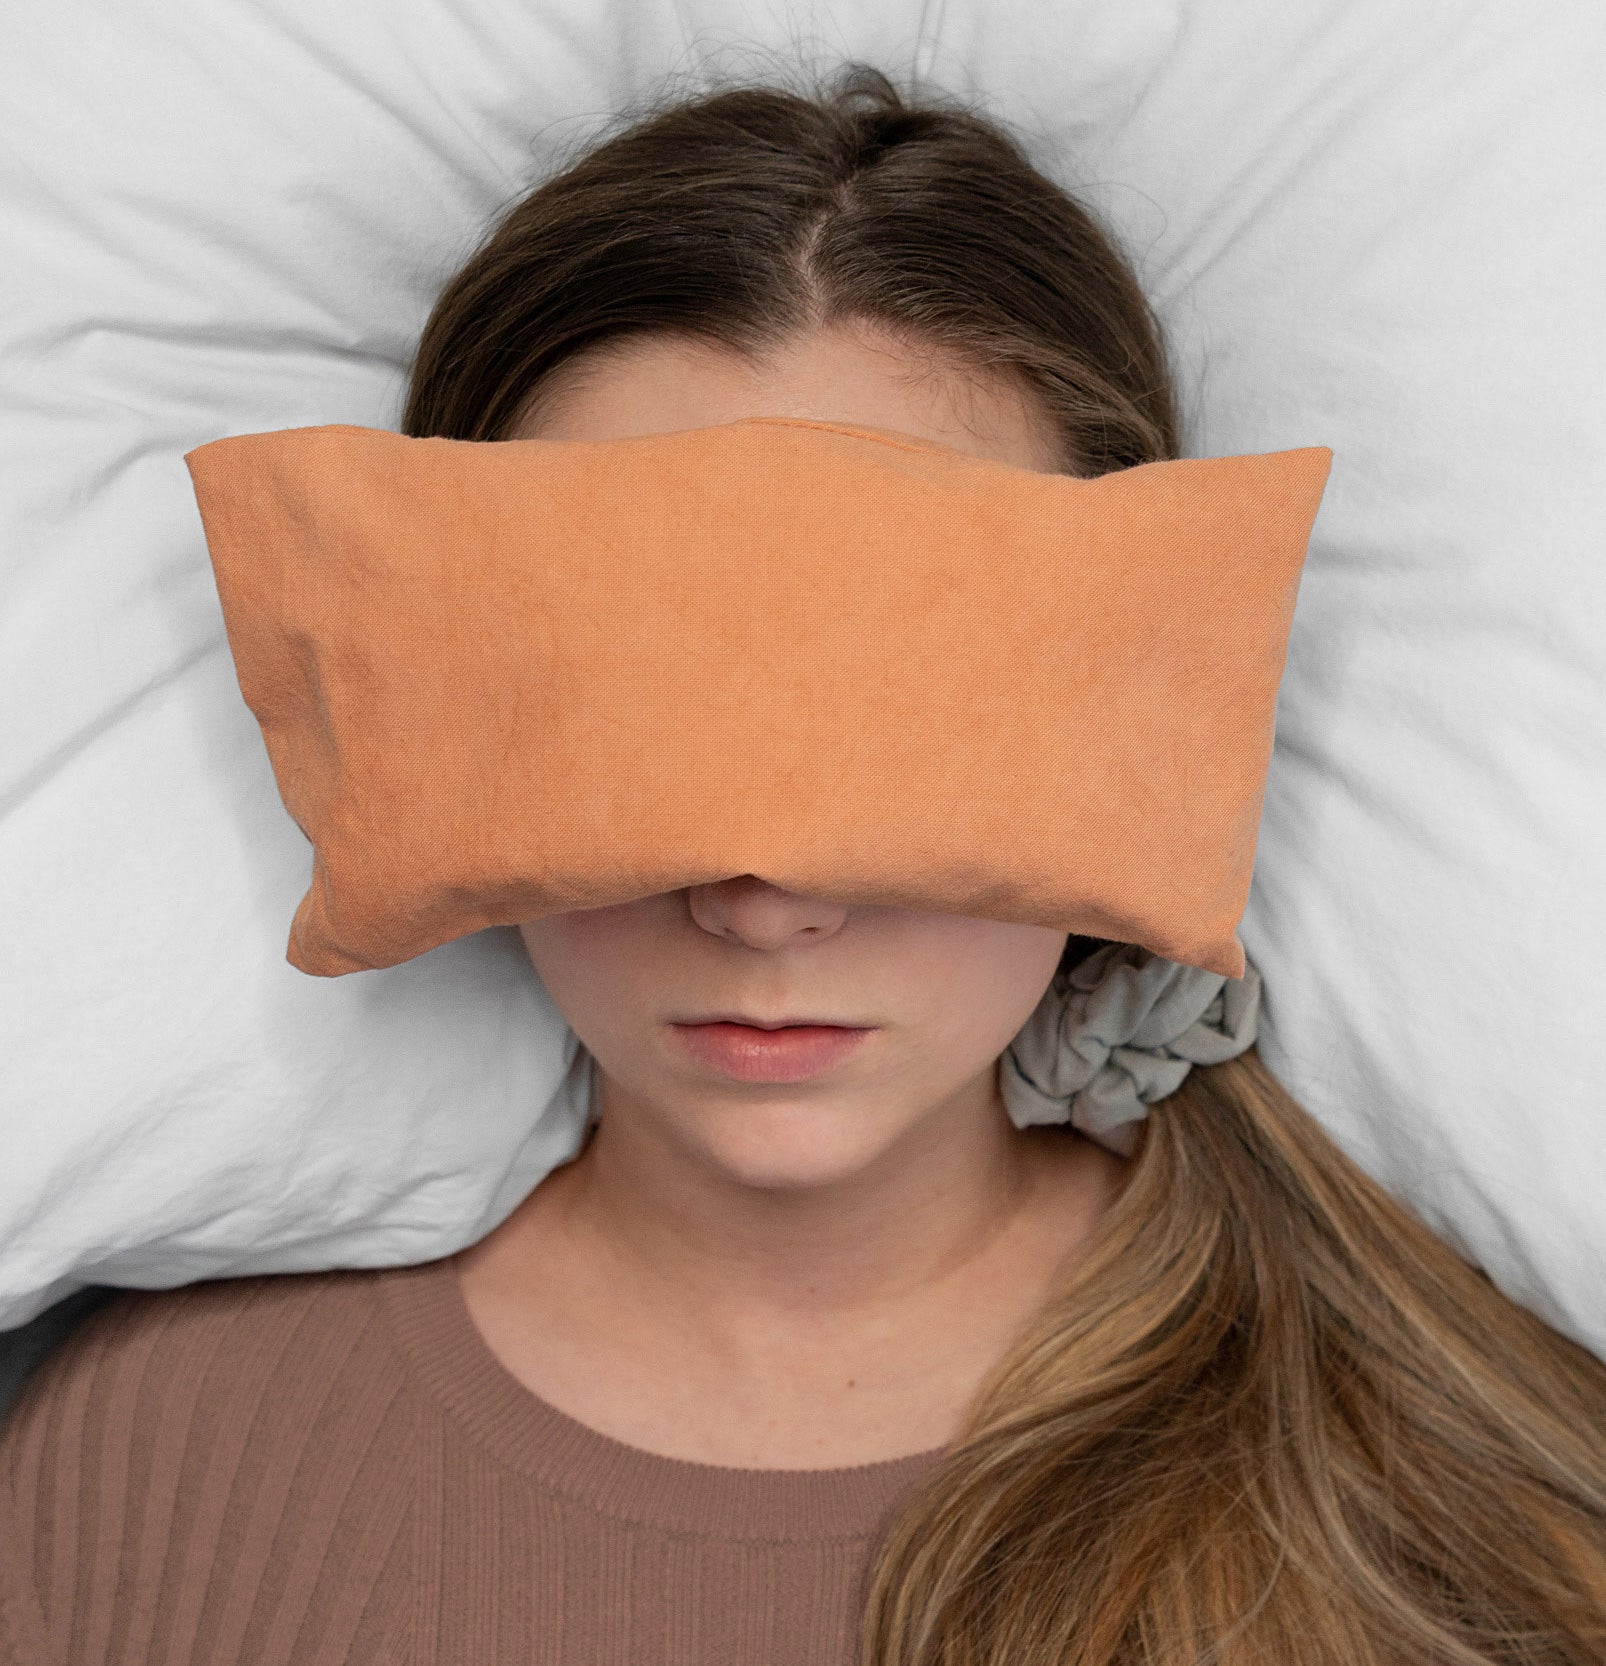 A person lying on a bed with a rectangular bean bag over their eyes